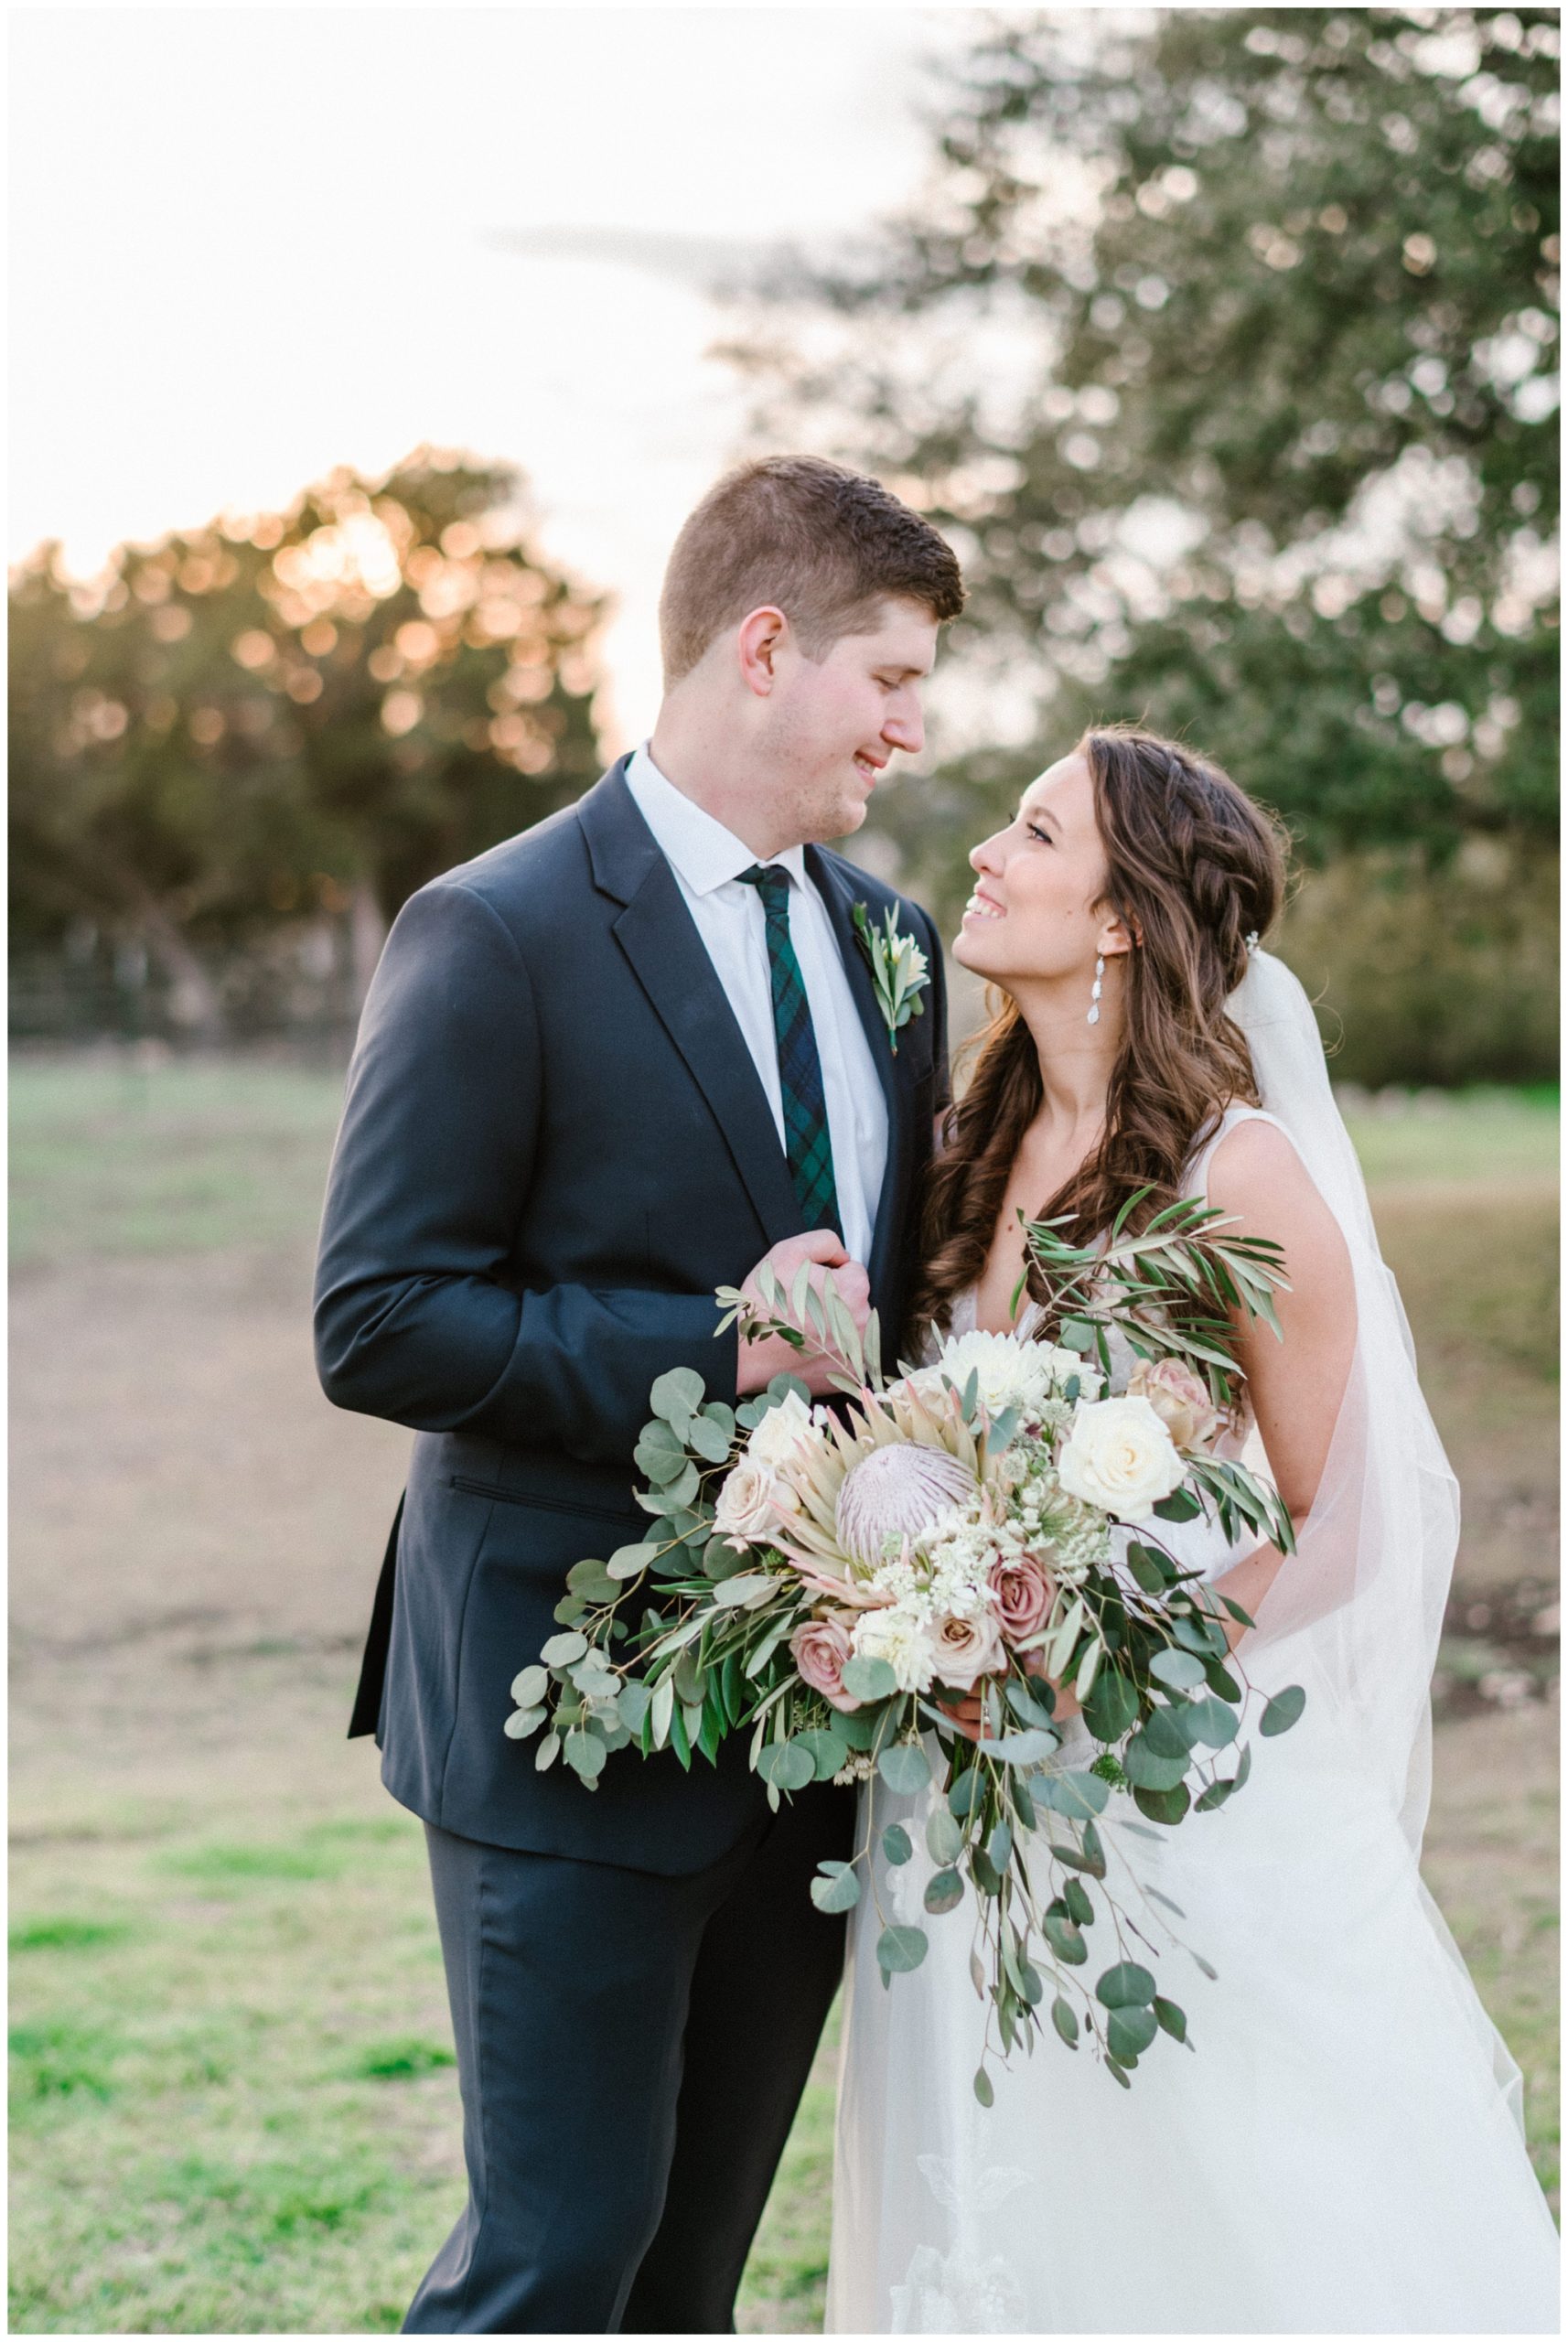 Bride and groom portraits at Sunset at Cricket Hill Ranch in Austin, Texas 